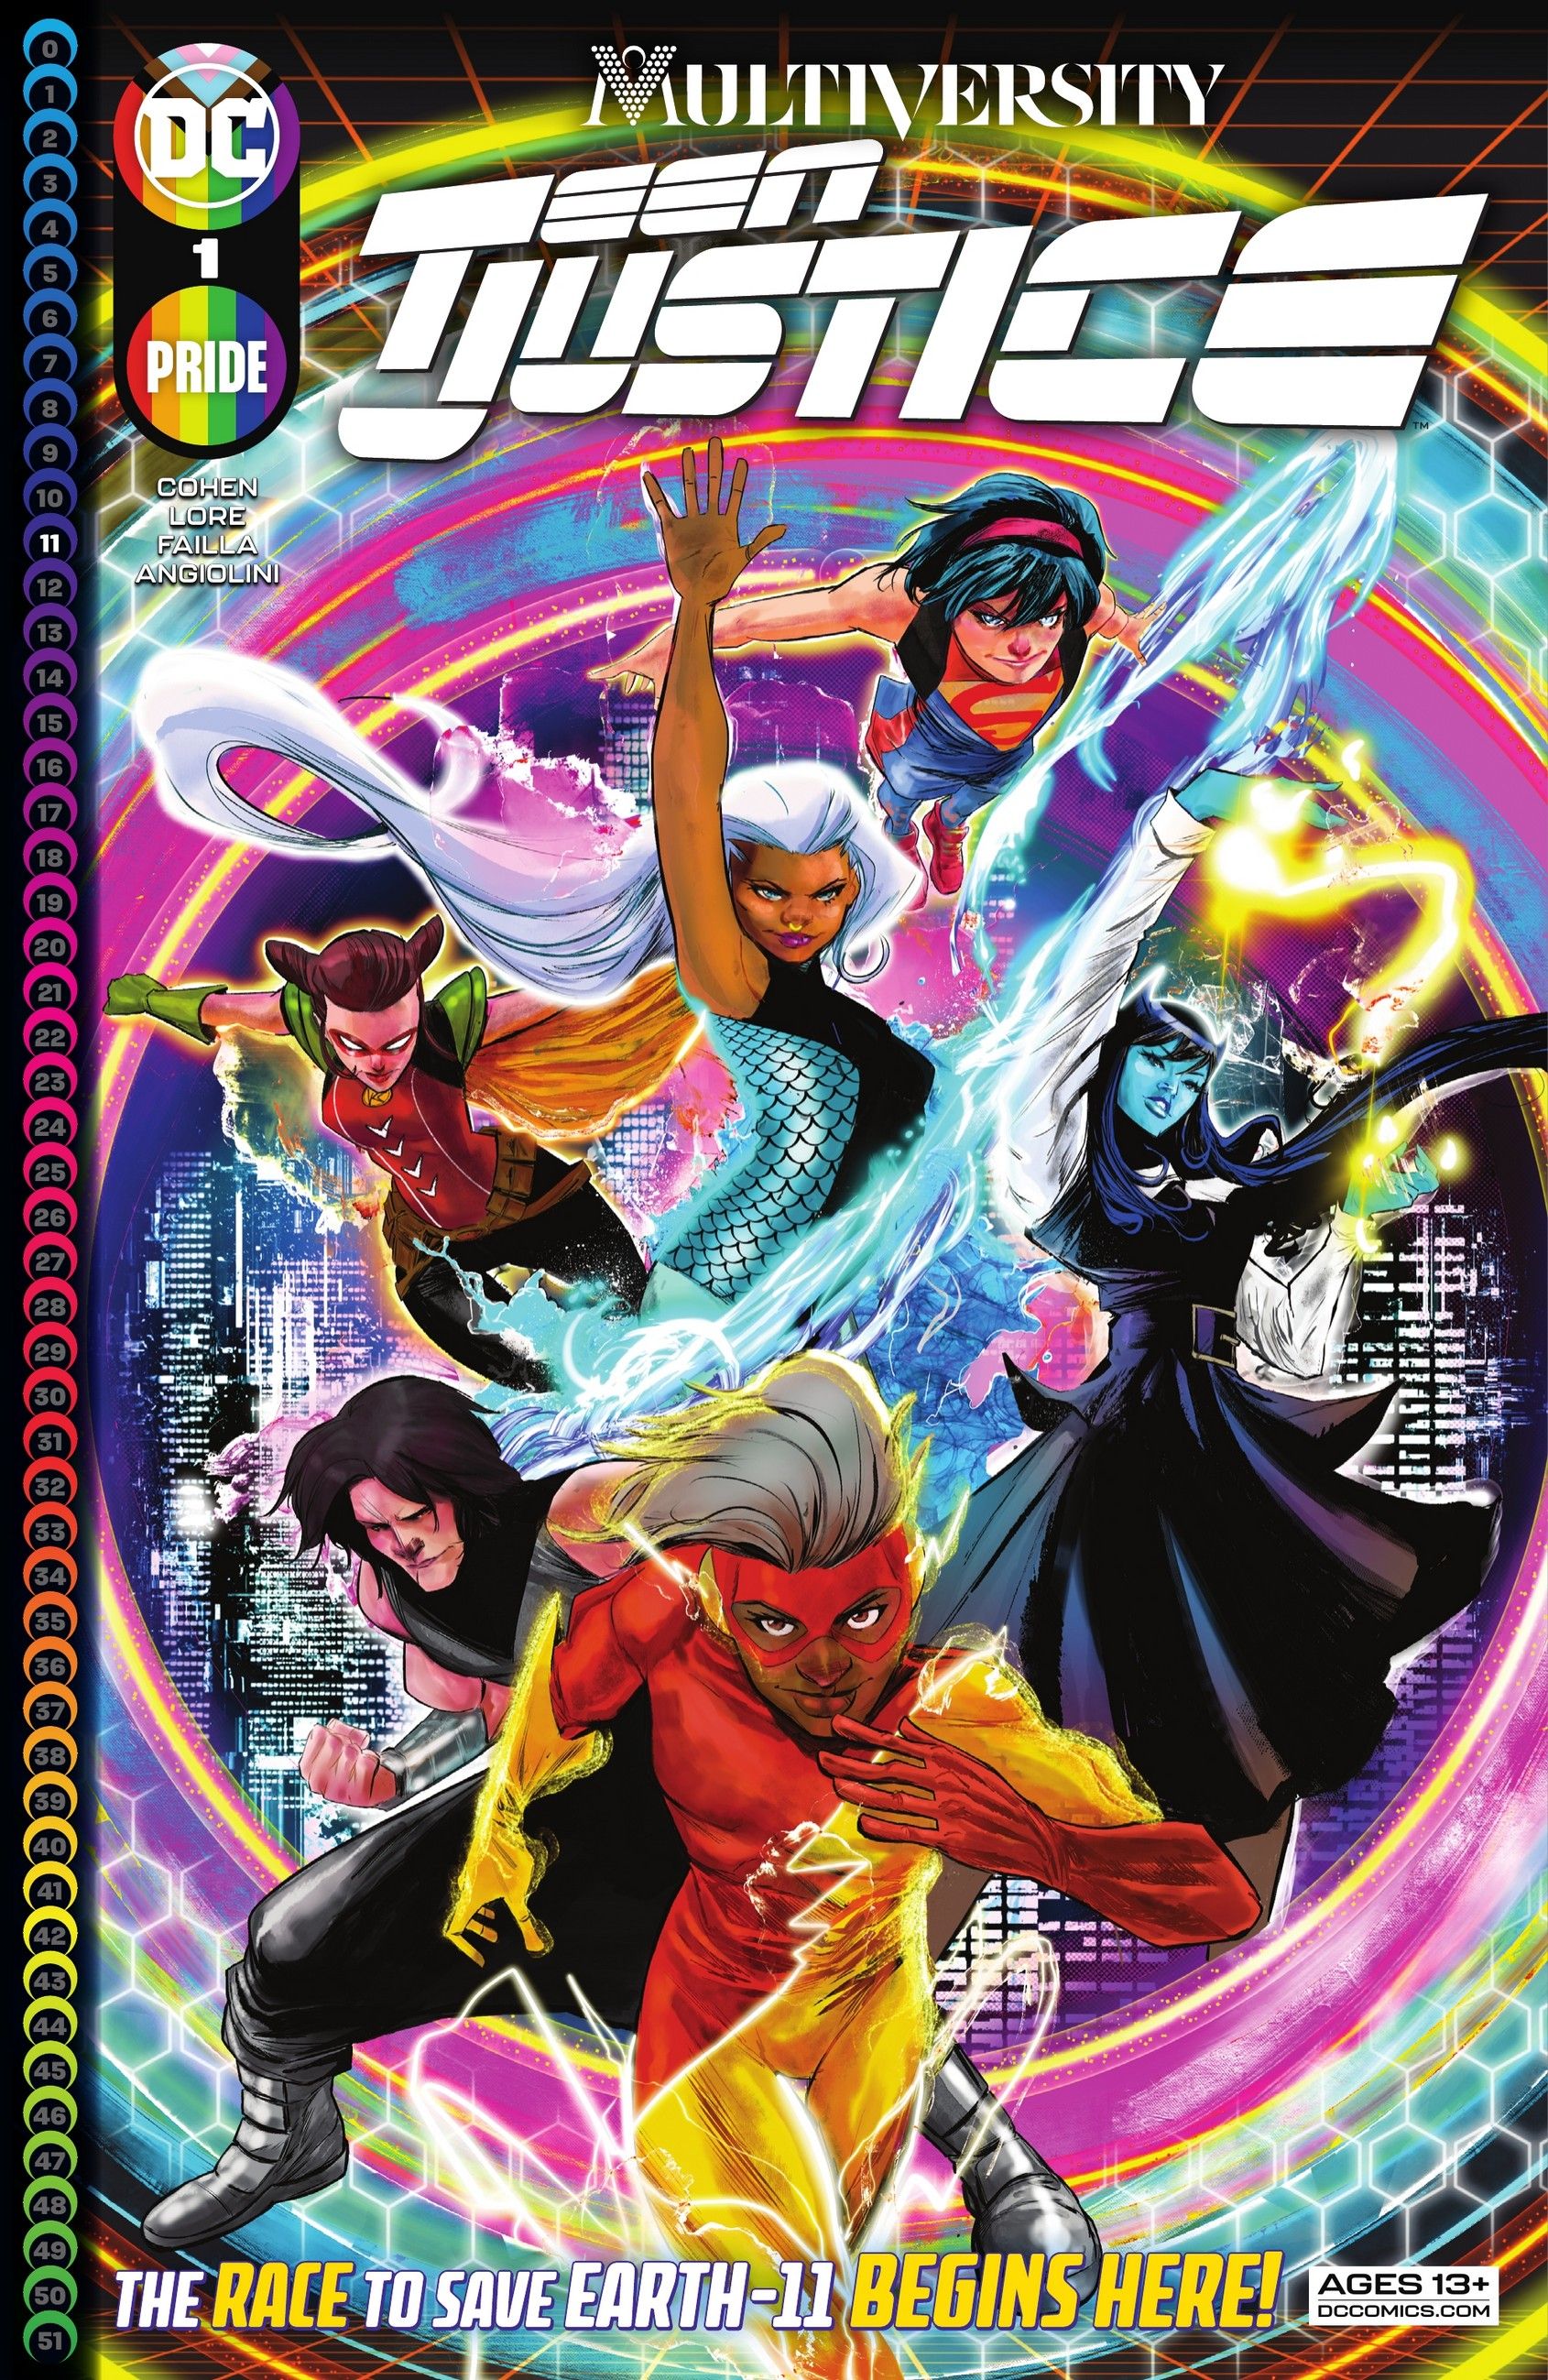 Cover of Multiversity: Teen Justice #1 